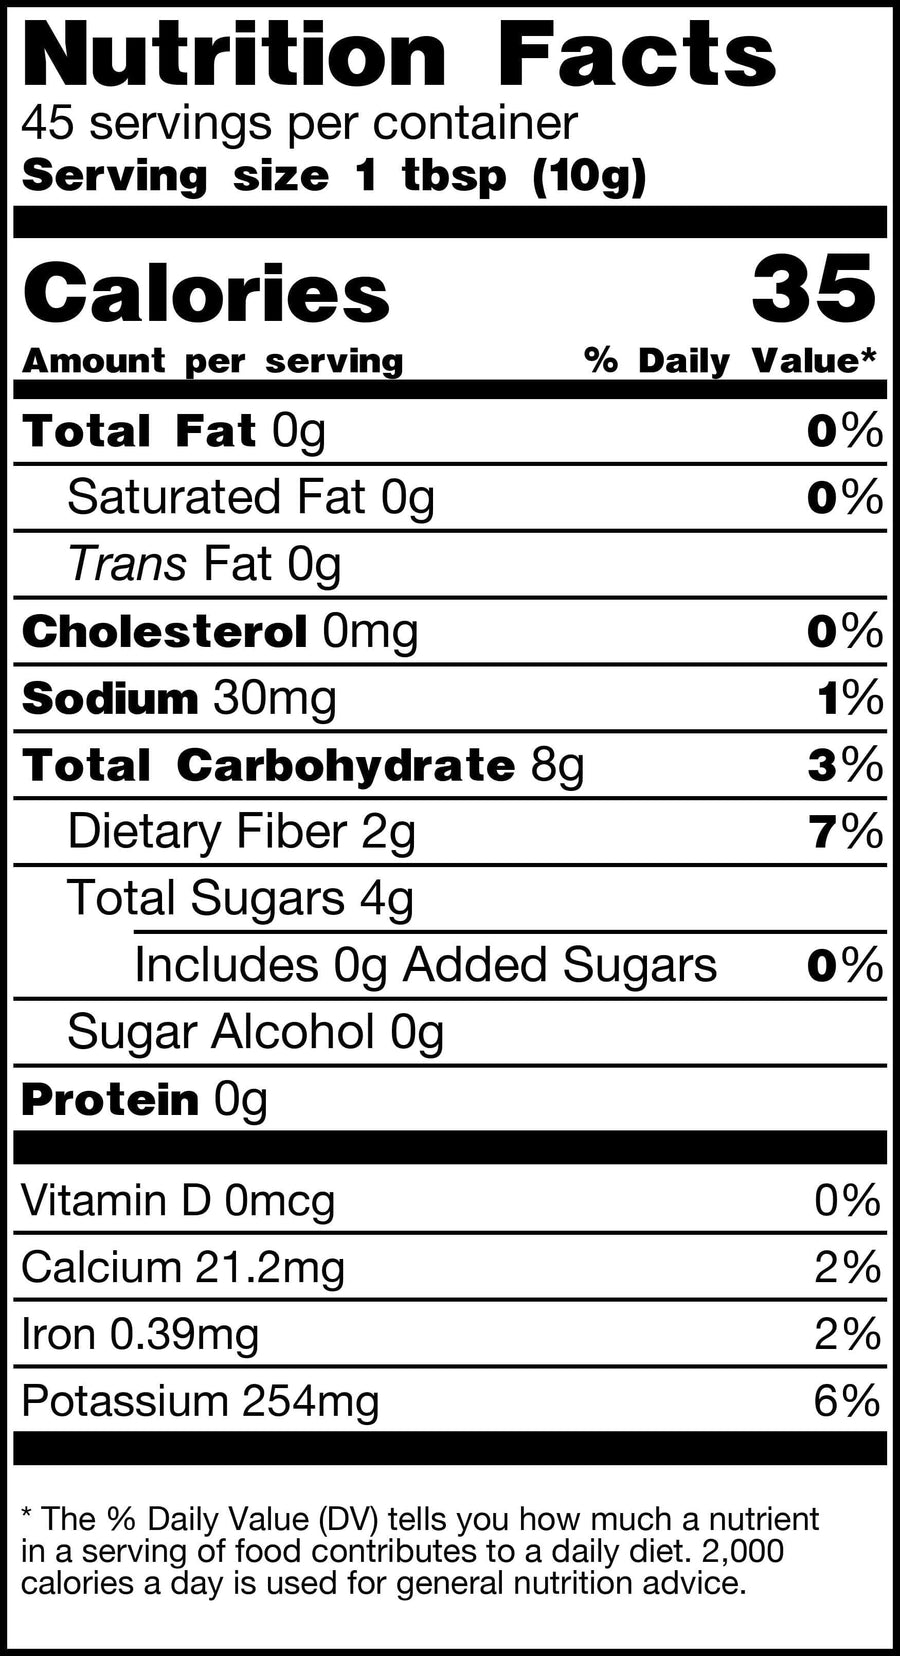 Image of a nutritional facts panel for Carrot Powder